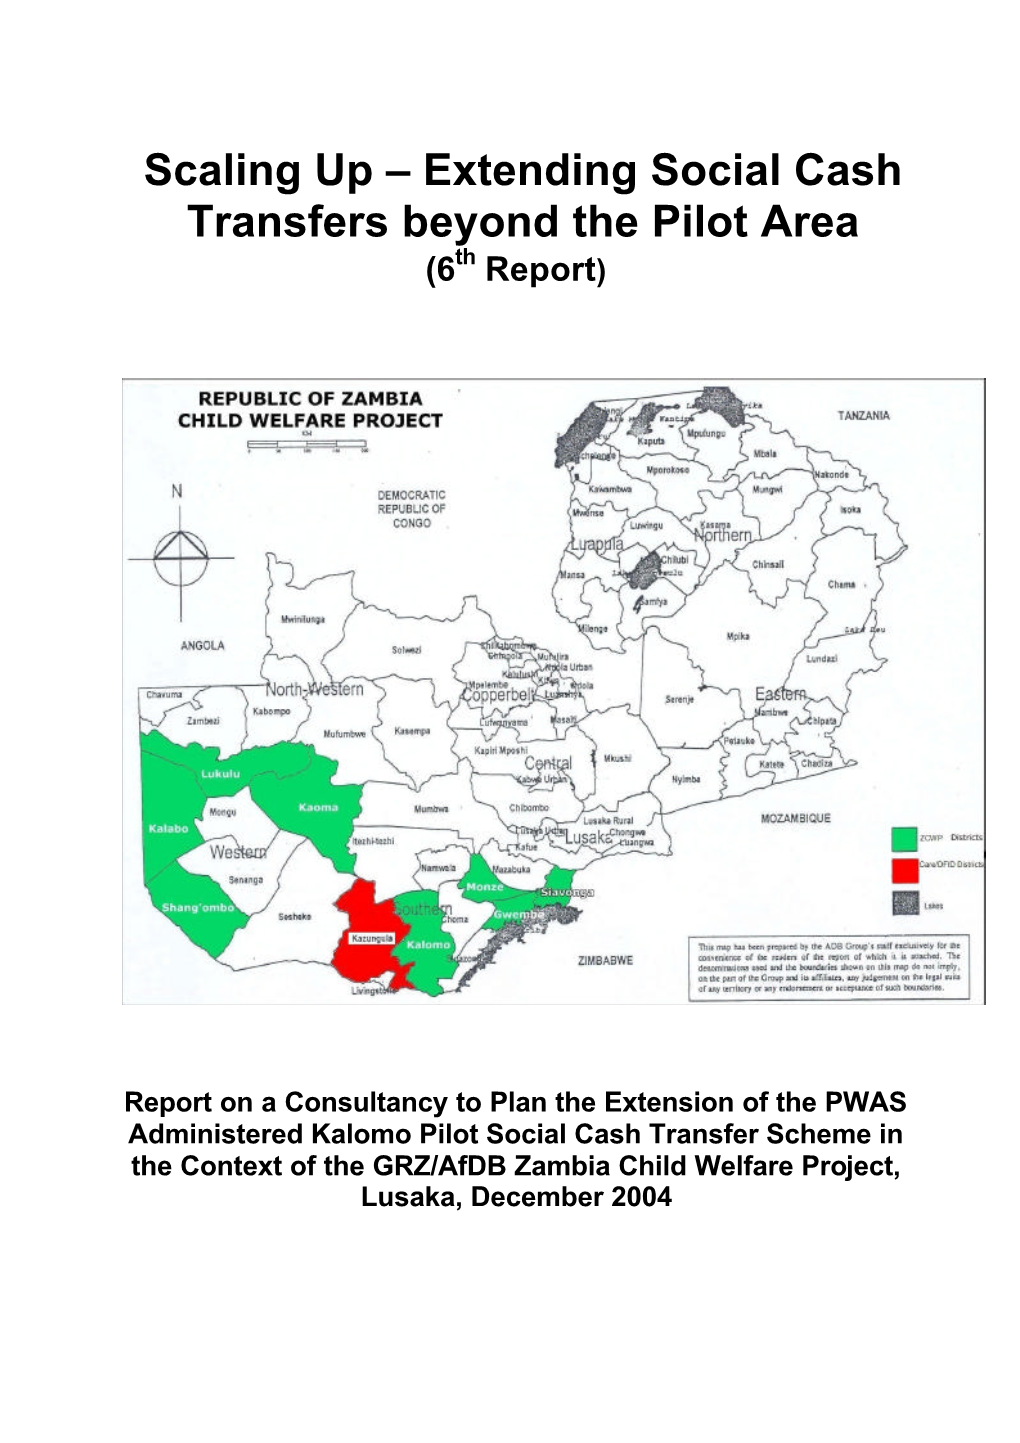 Scaling up – Extending Social Cash Transfers Beyond the Pilot Area (6Th Report)